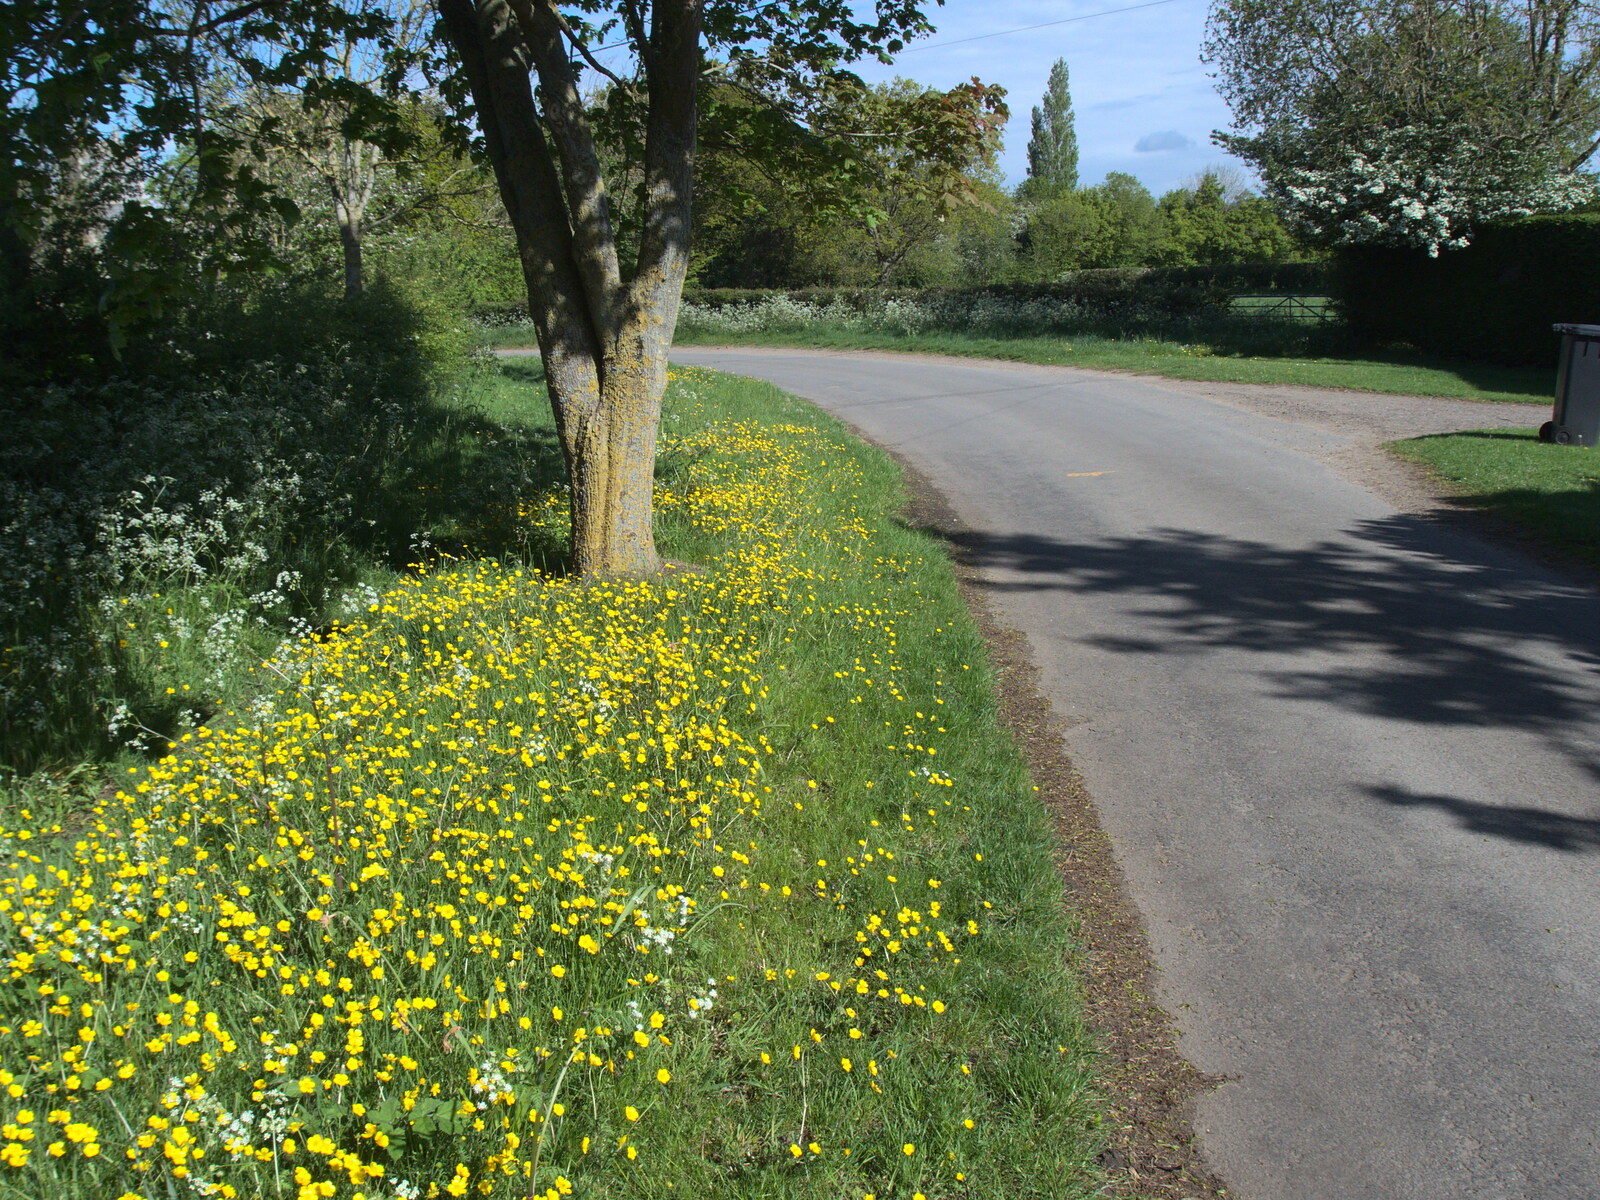 There's a bright carpet of yellow in Thrandeston from The BSCC at the Ampersand Tap, Sawmills Road, Diss, Norfolk - 20th May 2021